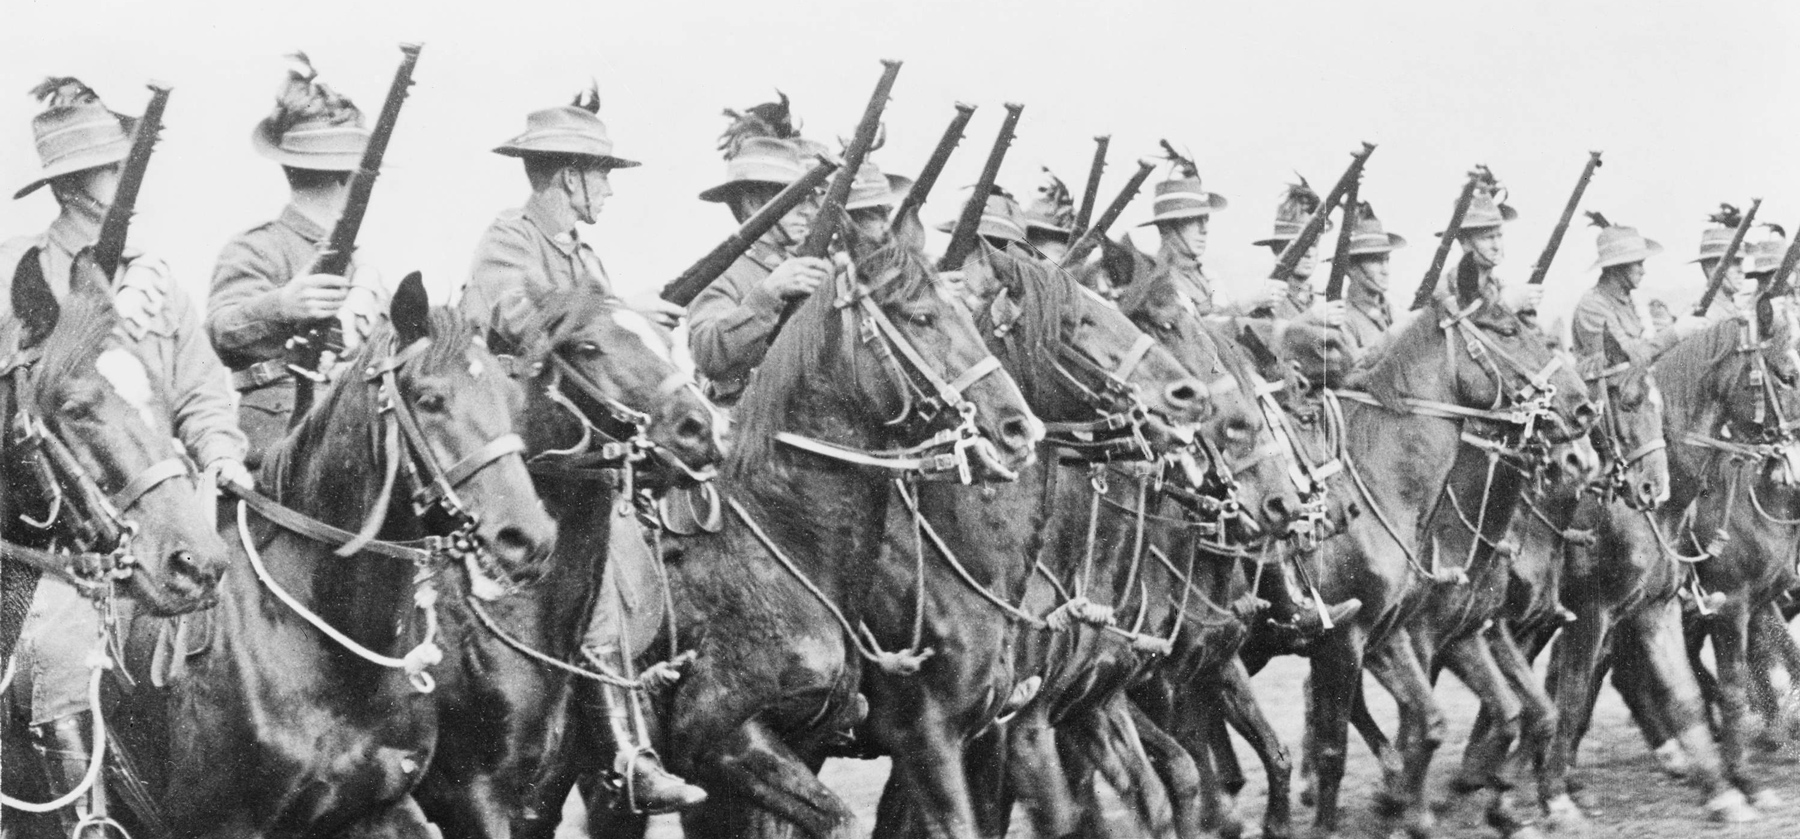 ANZACs – Remembering the innocents of World War One